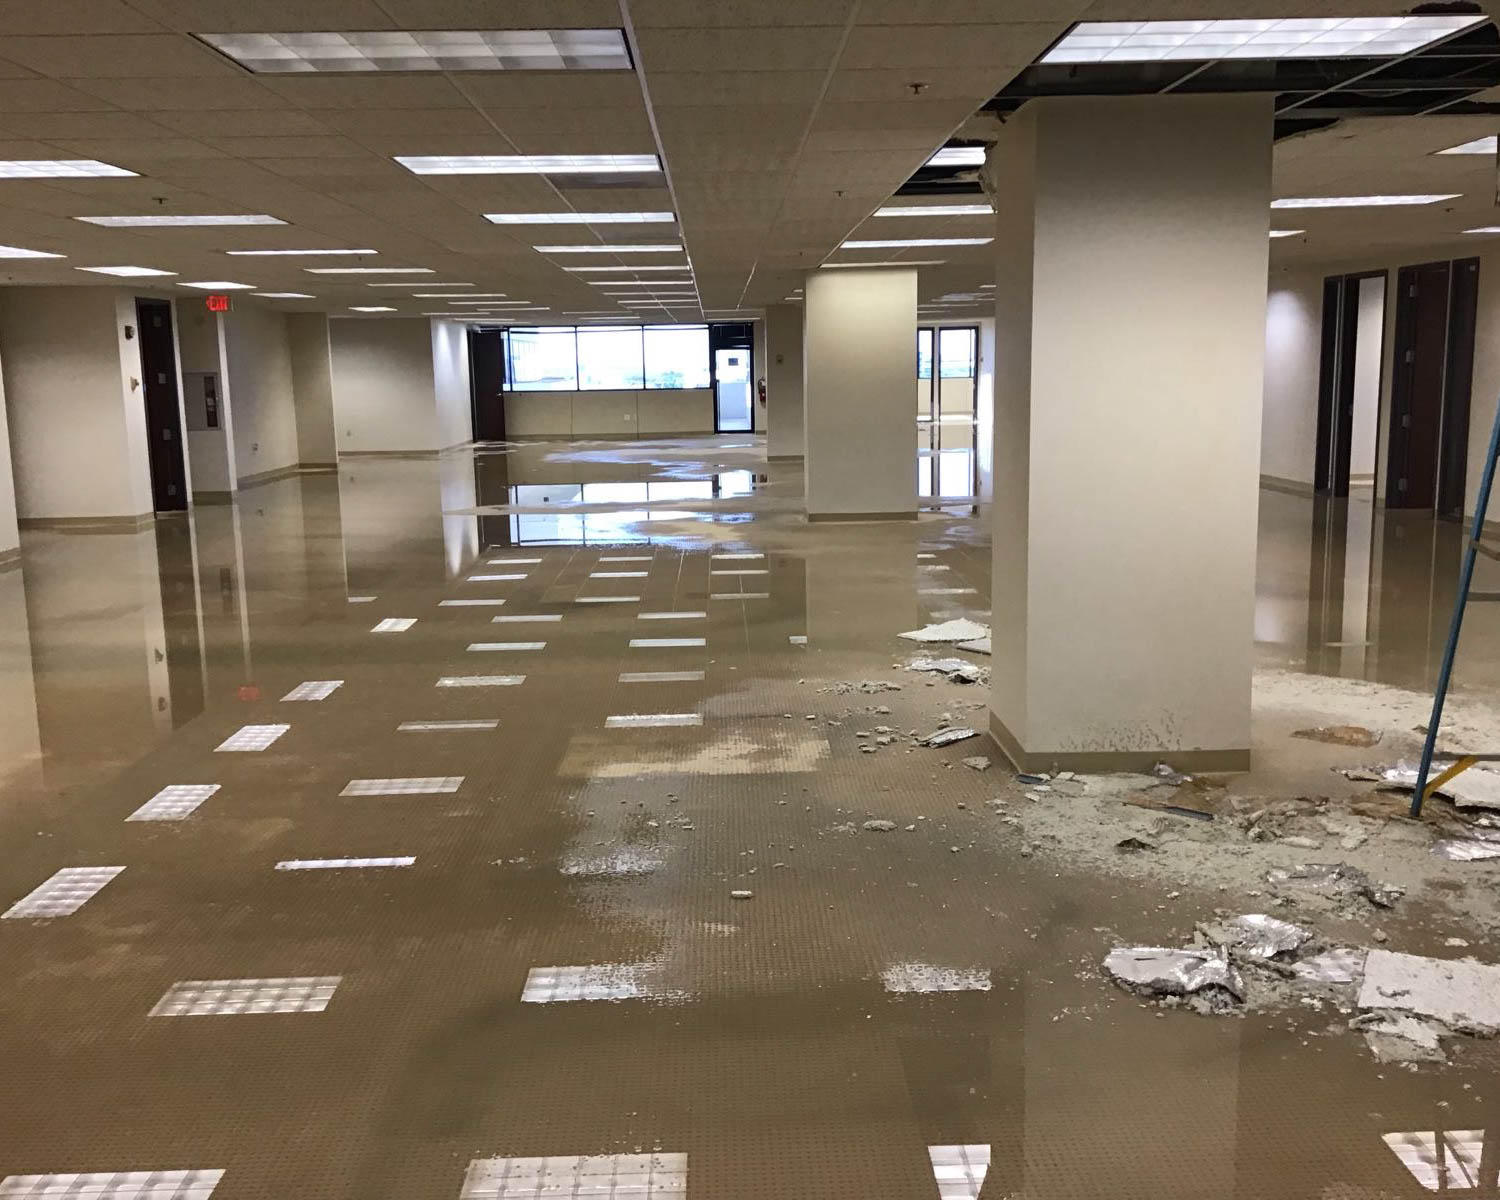 SERVPRO of Deerfield Beach was called to this commercial building after a severe leak. We are traine SERVPRO of Deerfield Beach Boca Raton (954)596-2208